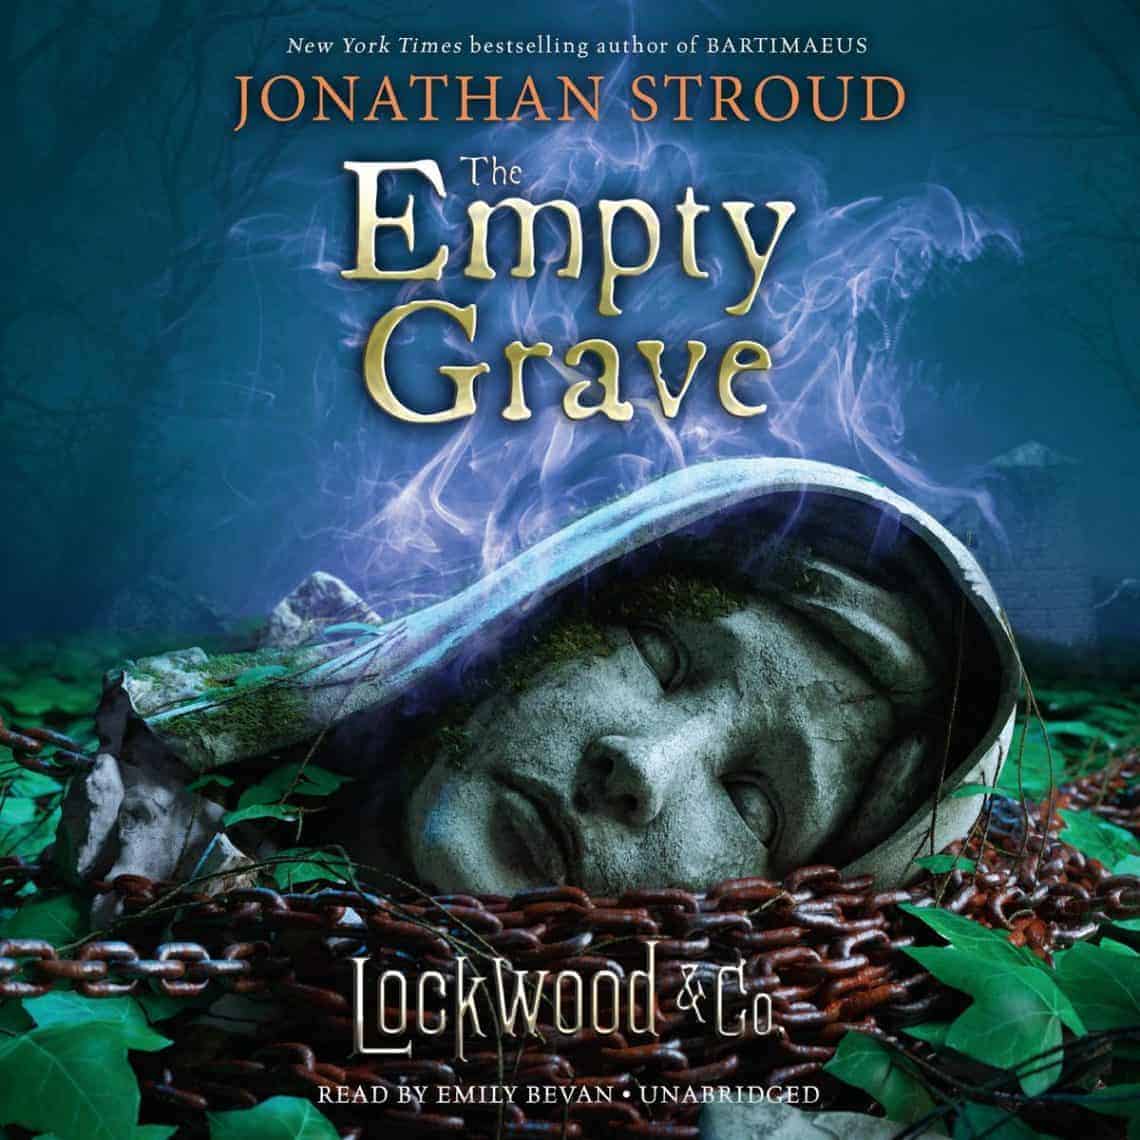 The Empty Grave Audiobook Free Download and Listen